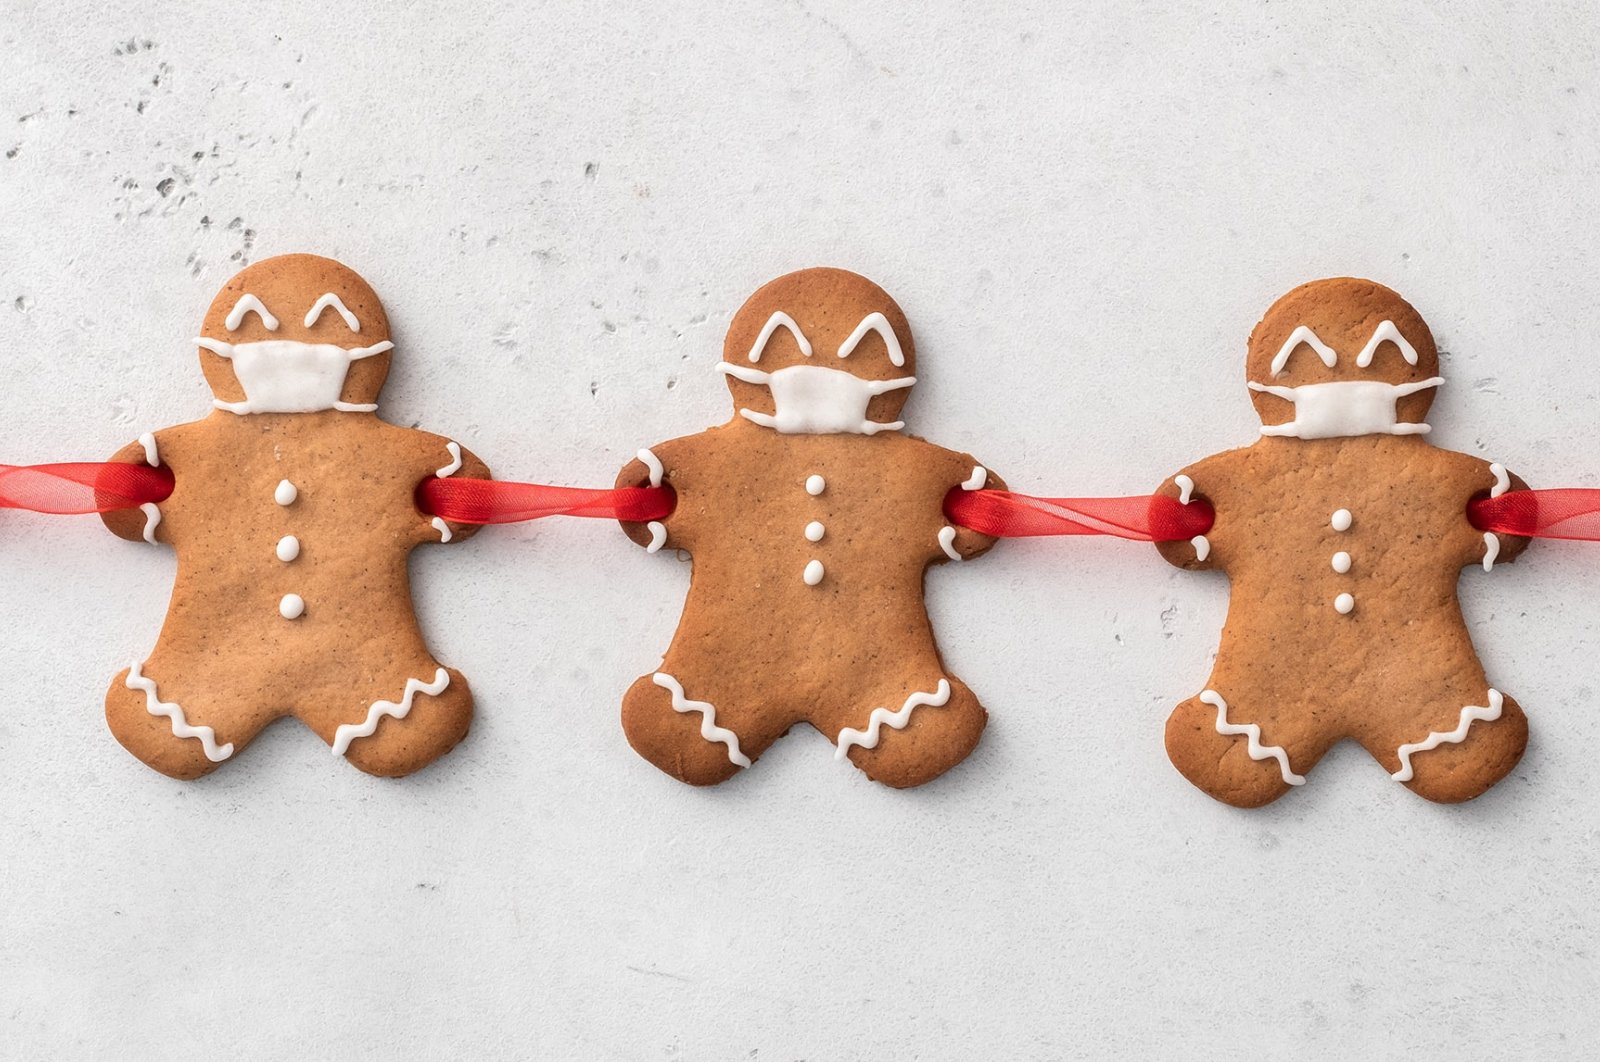 Gingerbread: 18 fun ways to make this yummy holiday tradition